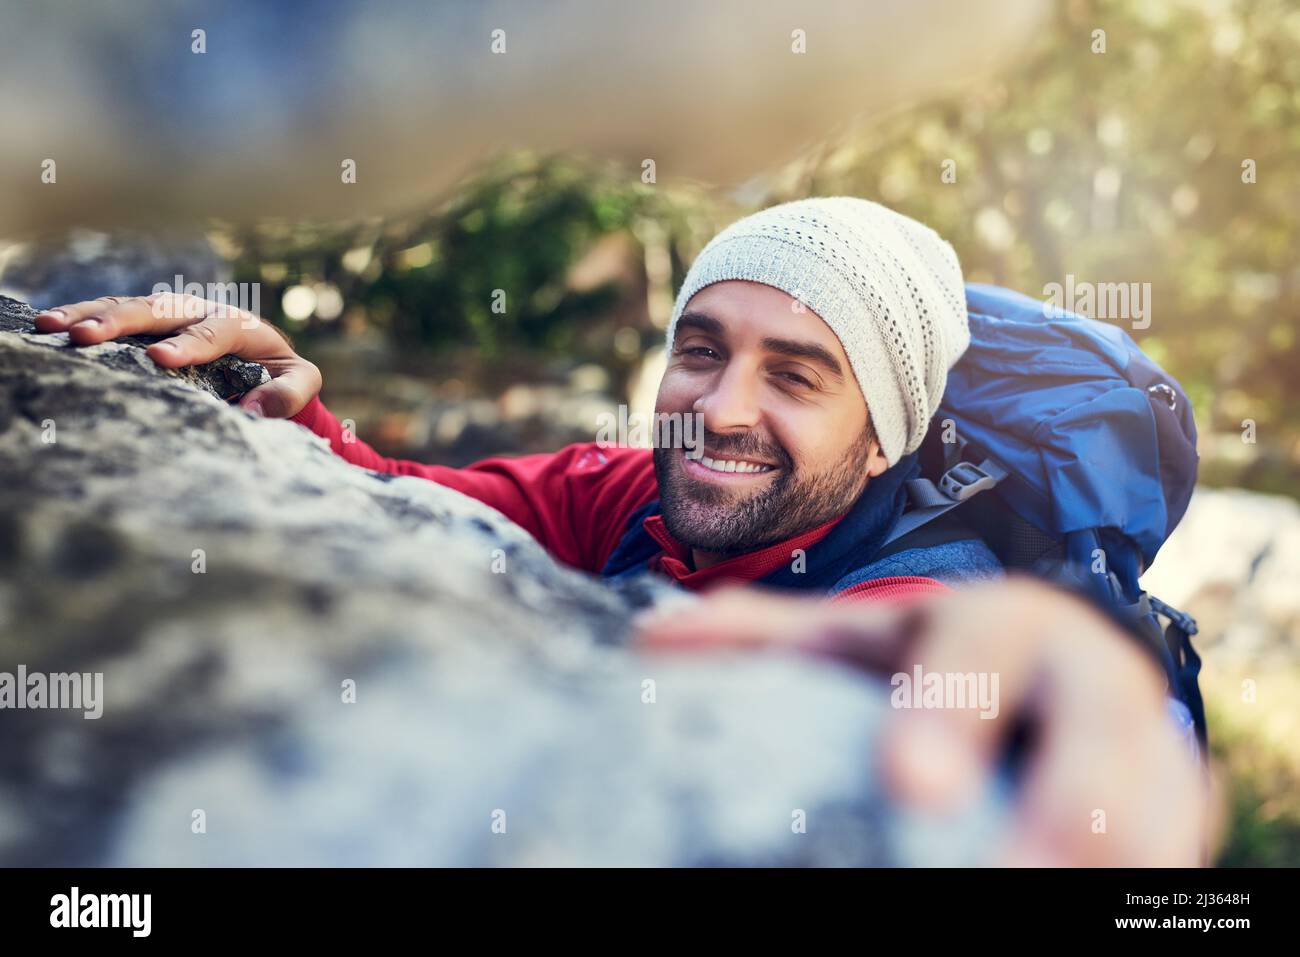 Onwards and upwards. Portrait of a happy hiker climbing over rocks on a mountain trail. Stock Photo